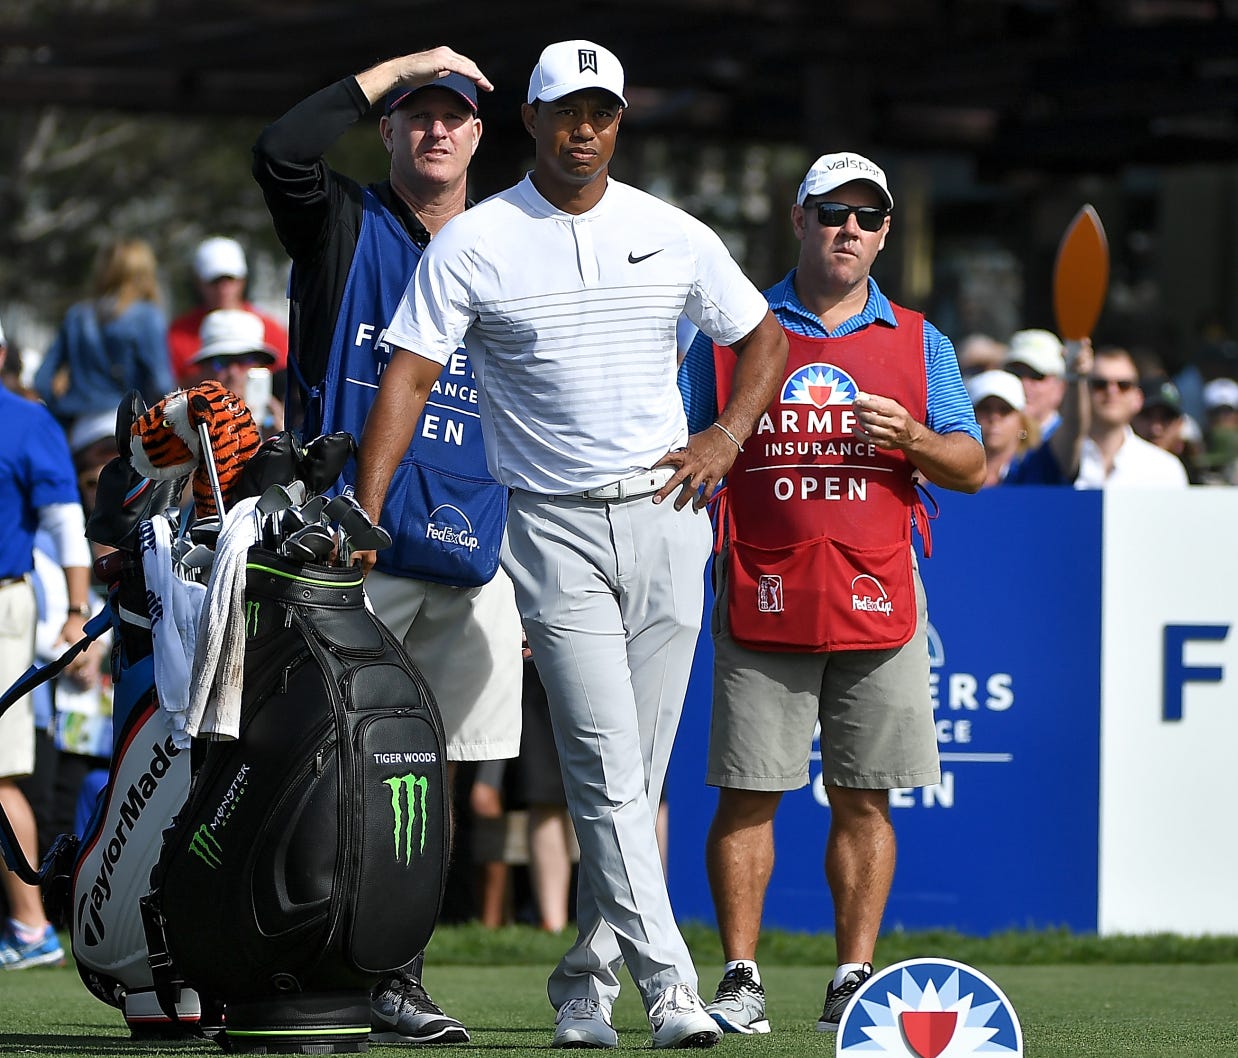 Tiger Woods looks on on the first tee during the third round of the Farmers Insurance Open at Torrey Pines South.